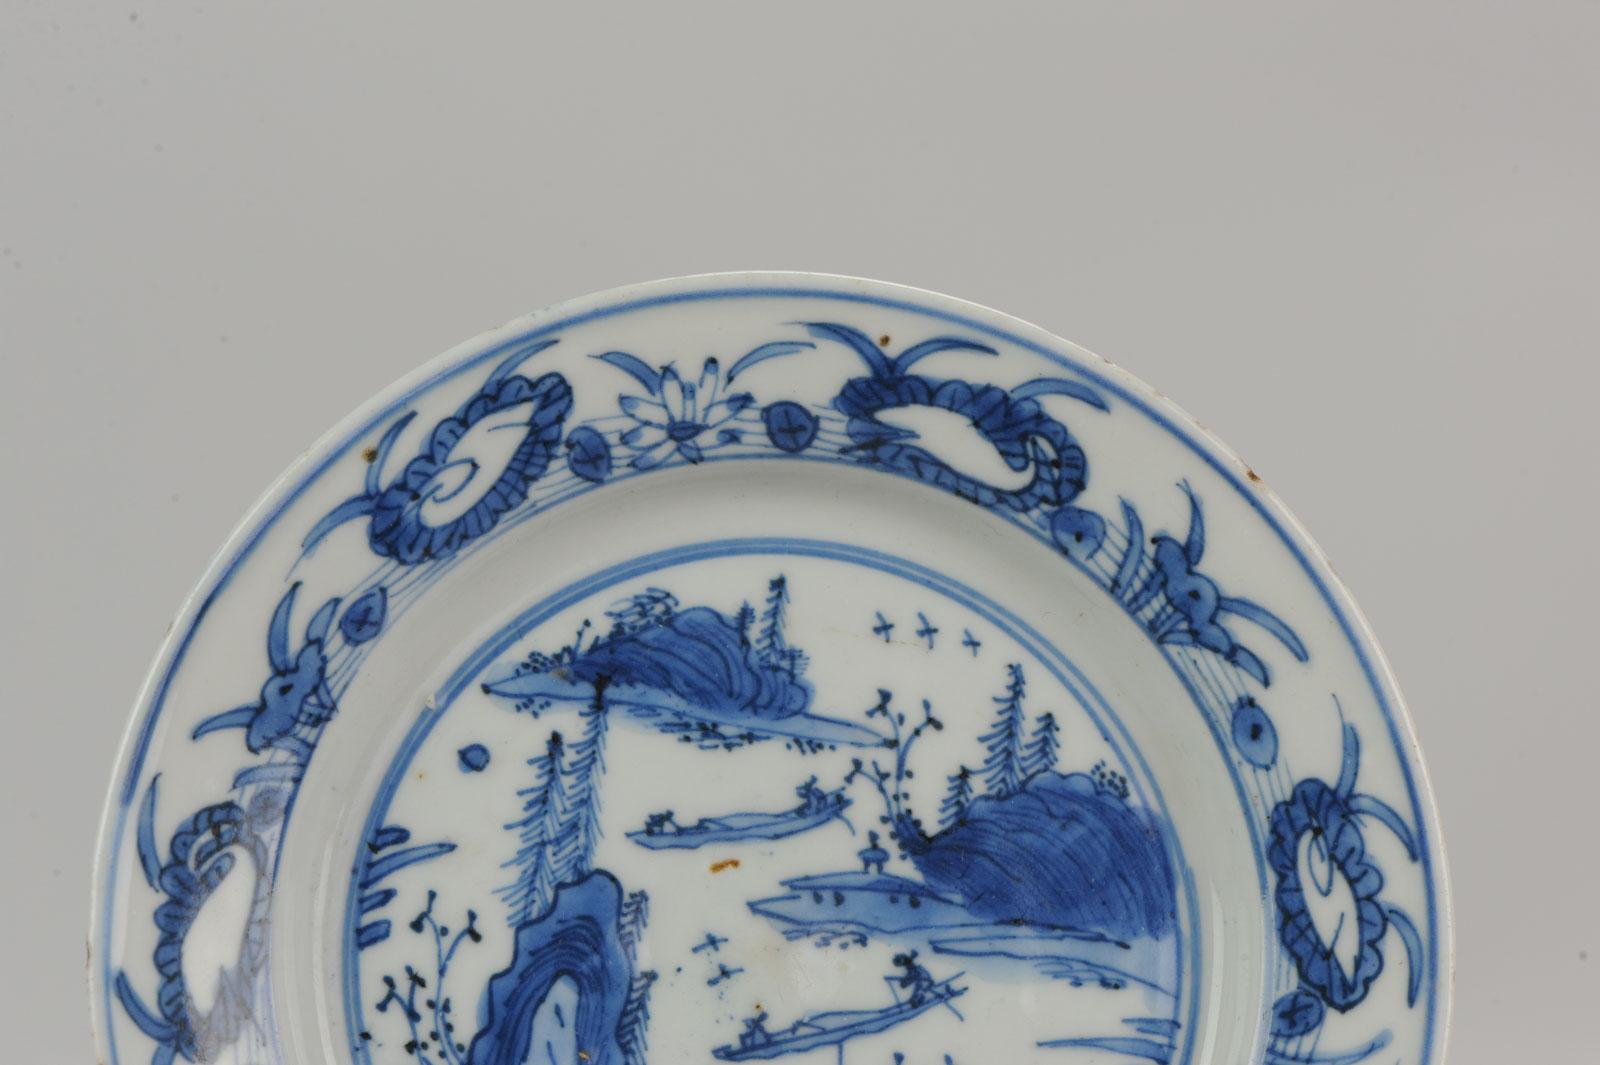 Antique Chinese Porcelain Ming 1540-1580 Jiajing Wanli Landscape Plate with Bird For Sale 4